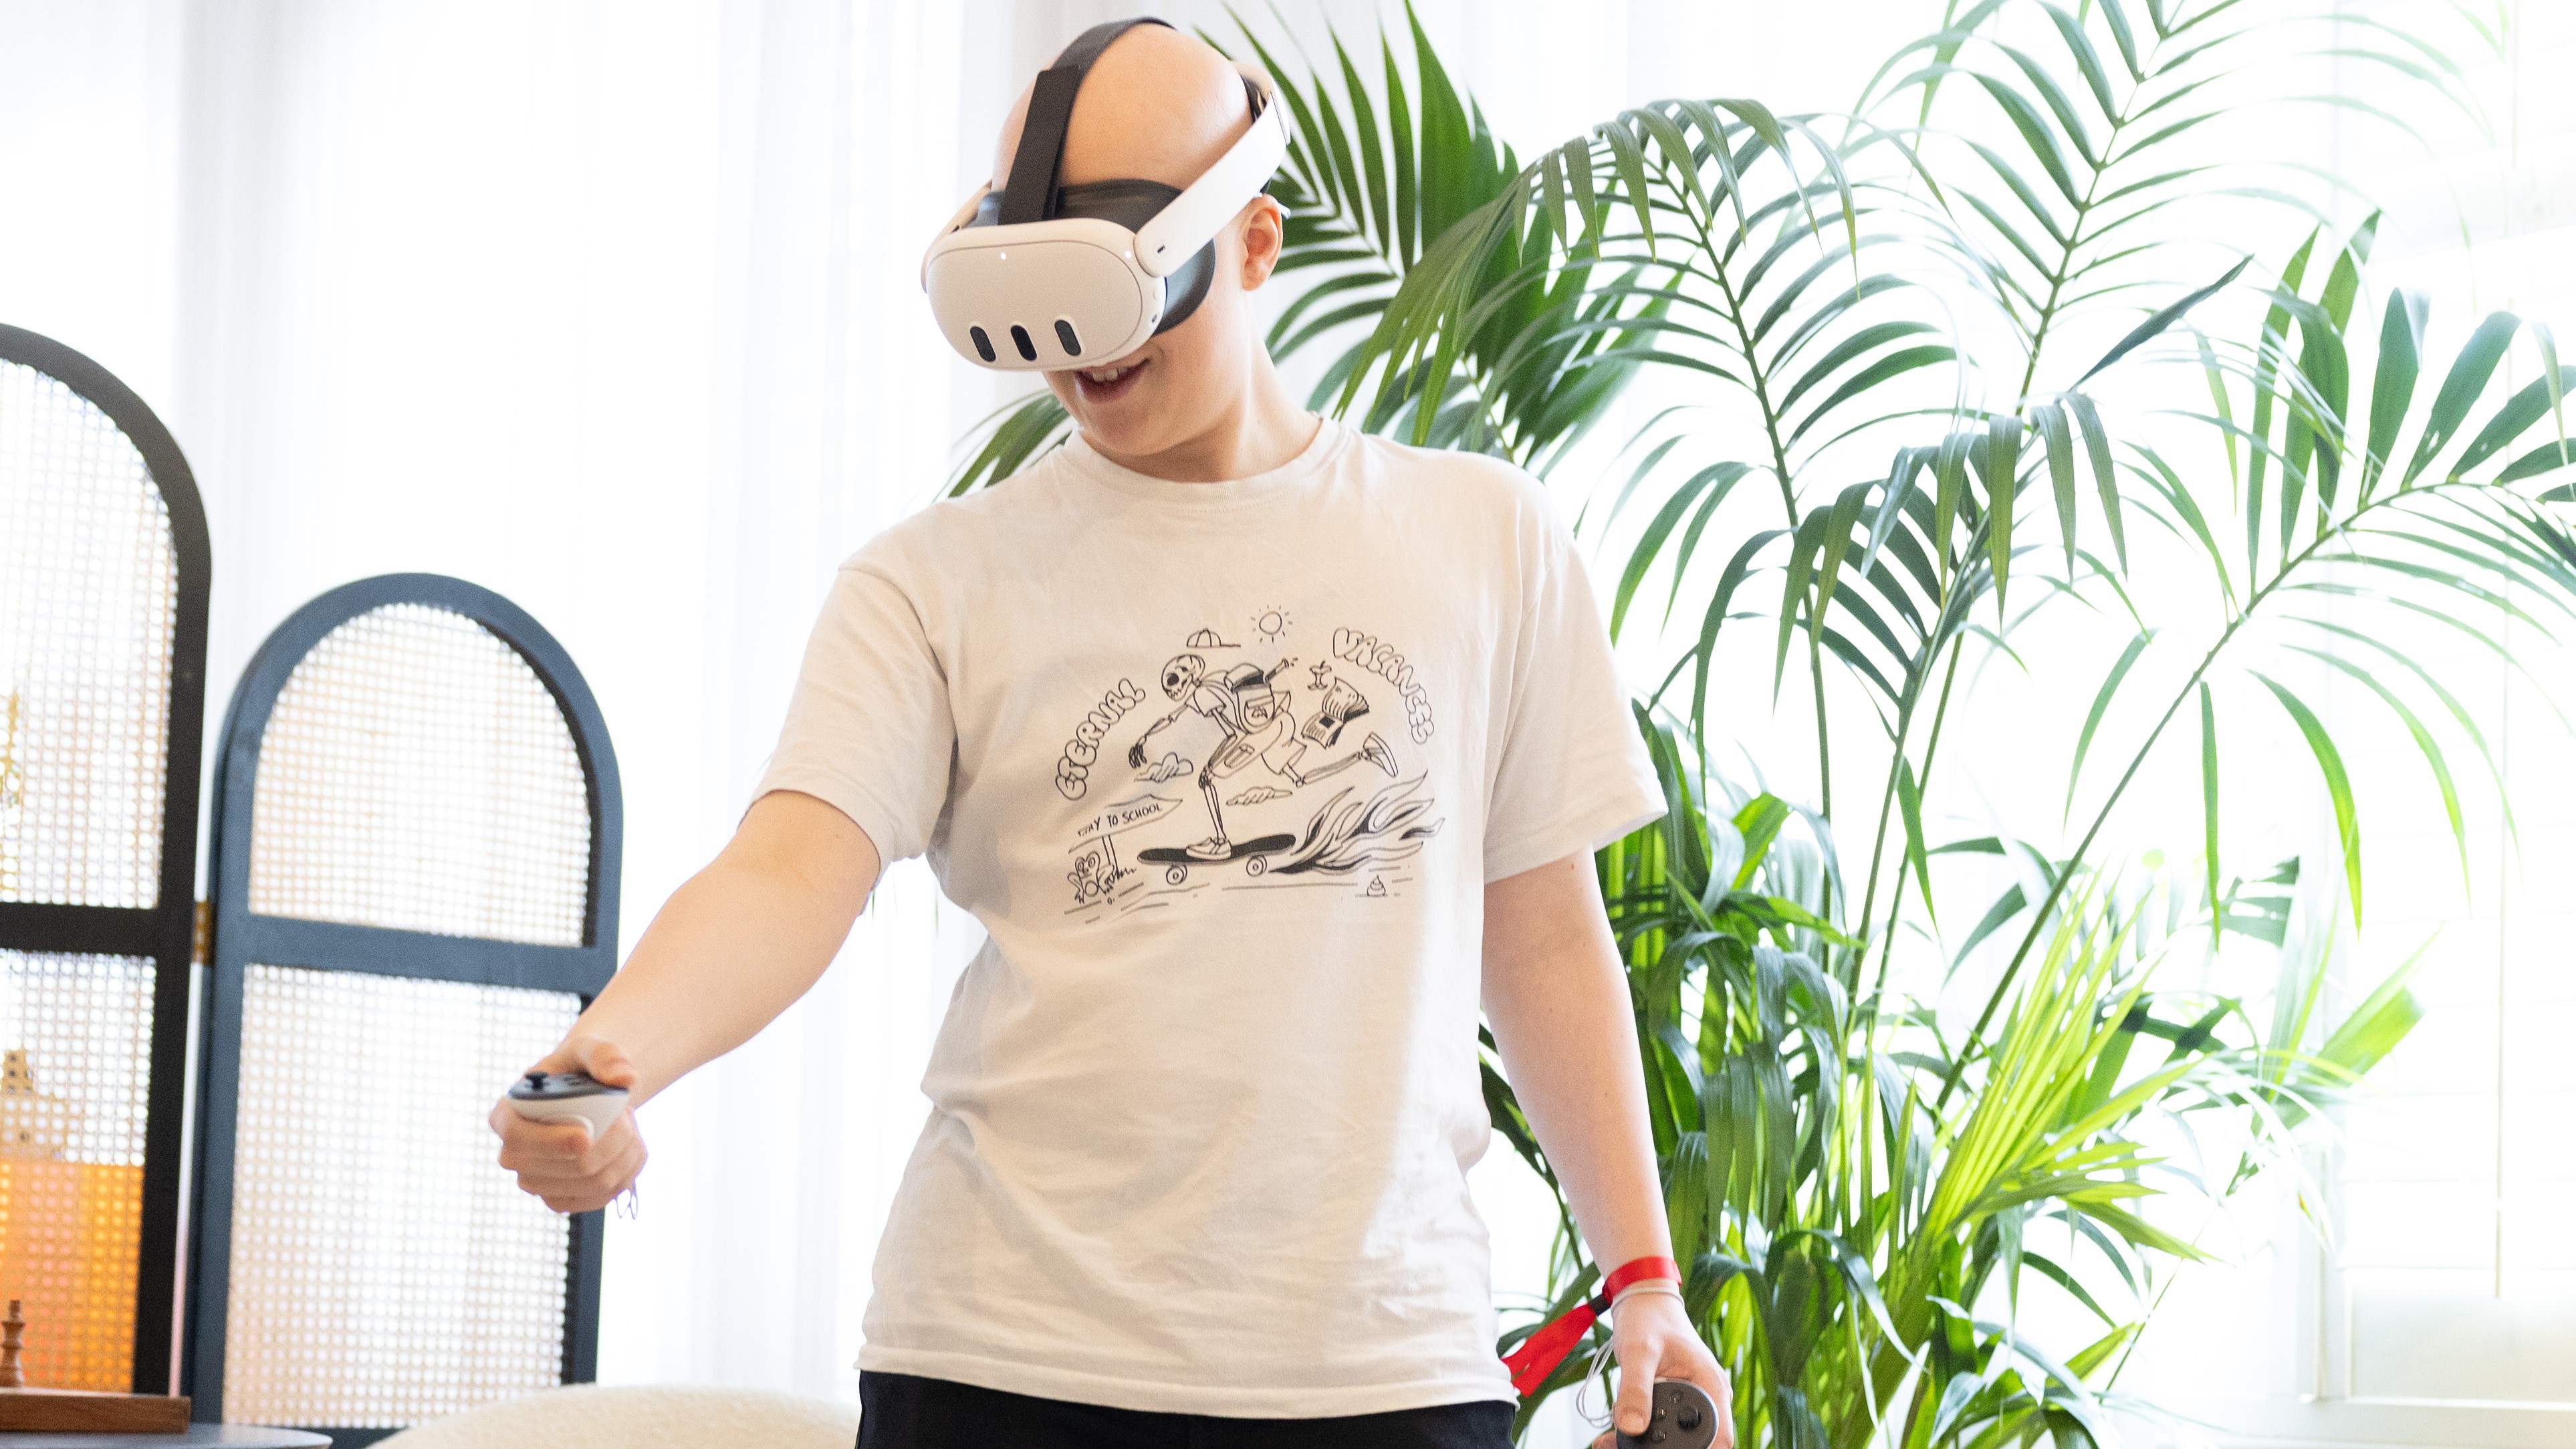 Hamish wearing the Meta Quest 3 as he stands in front of a plant. He's looking at something in VR with wonder.